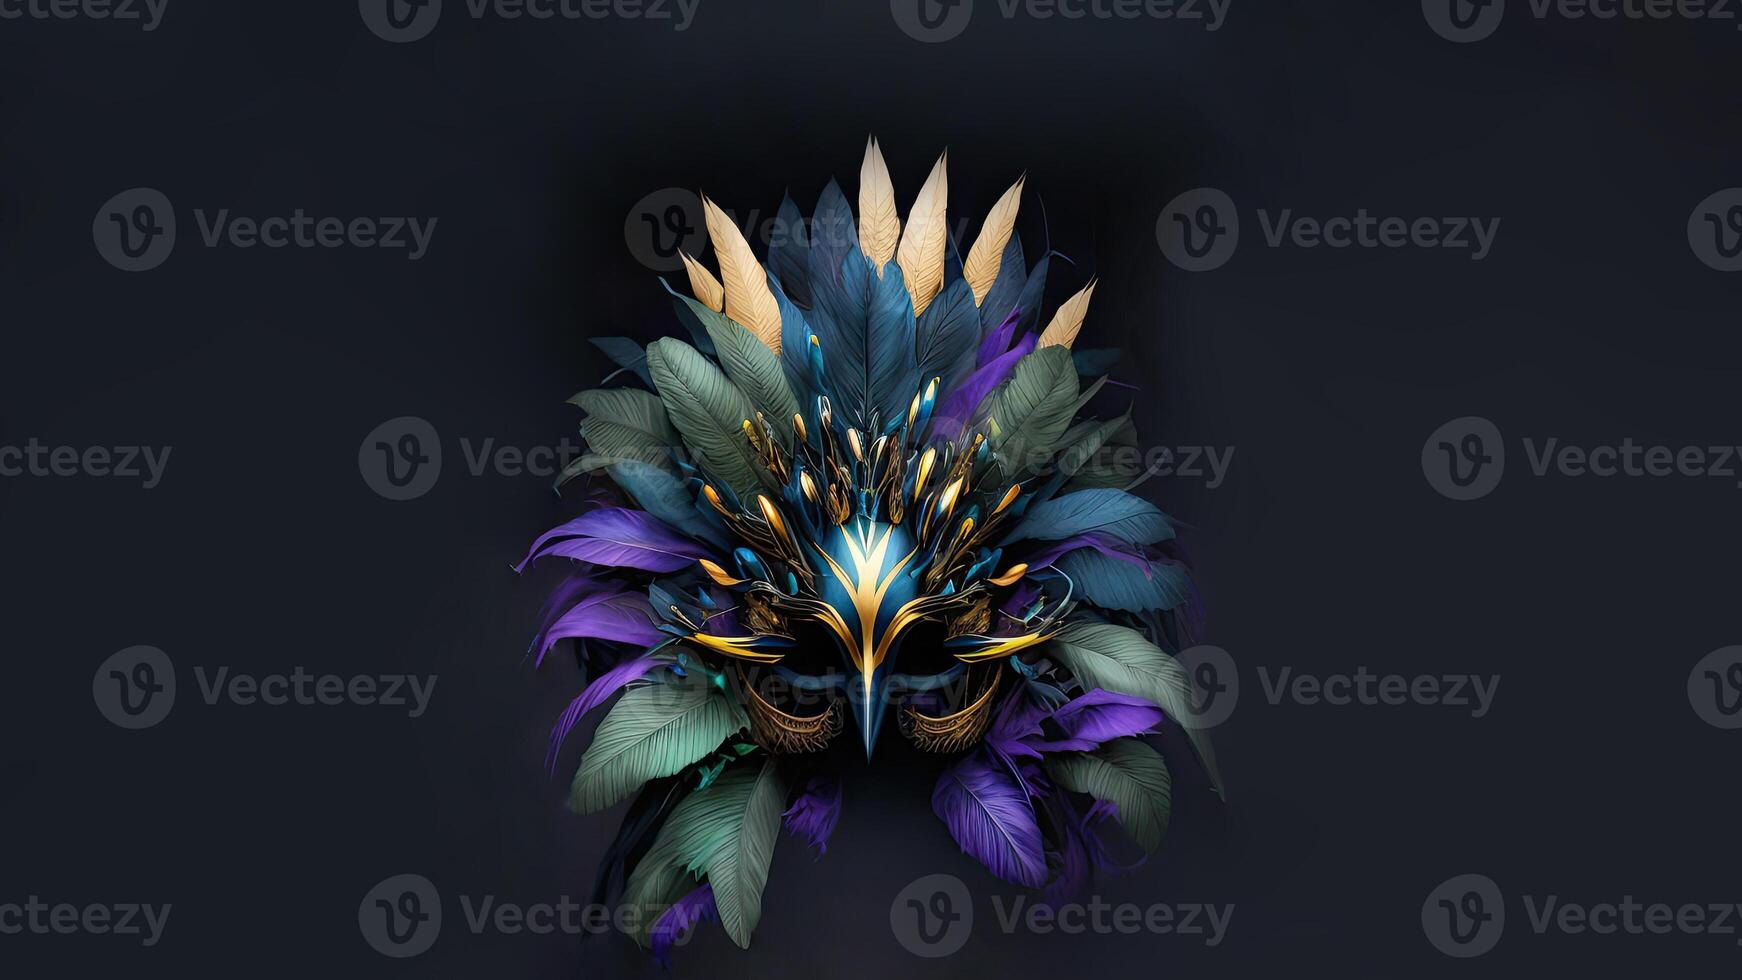 3D Render of Venetian Mask With Feathers On Dark Gray Background And Copy Space. photo